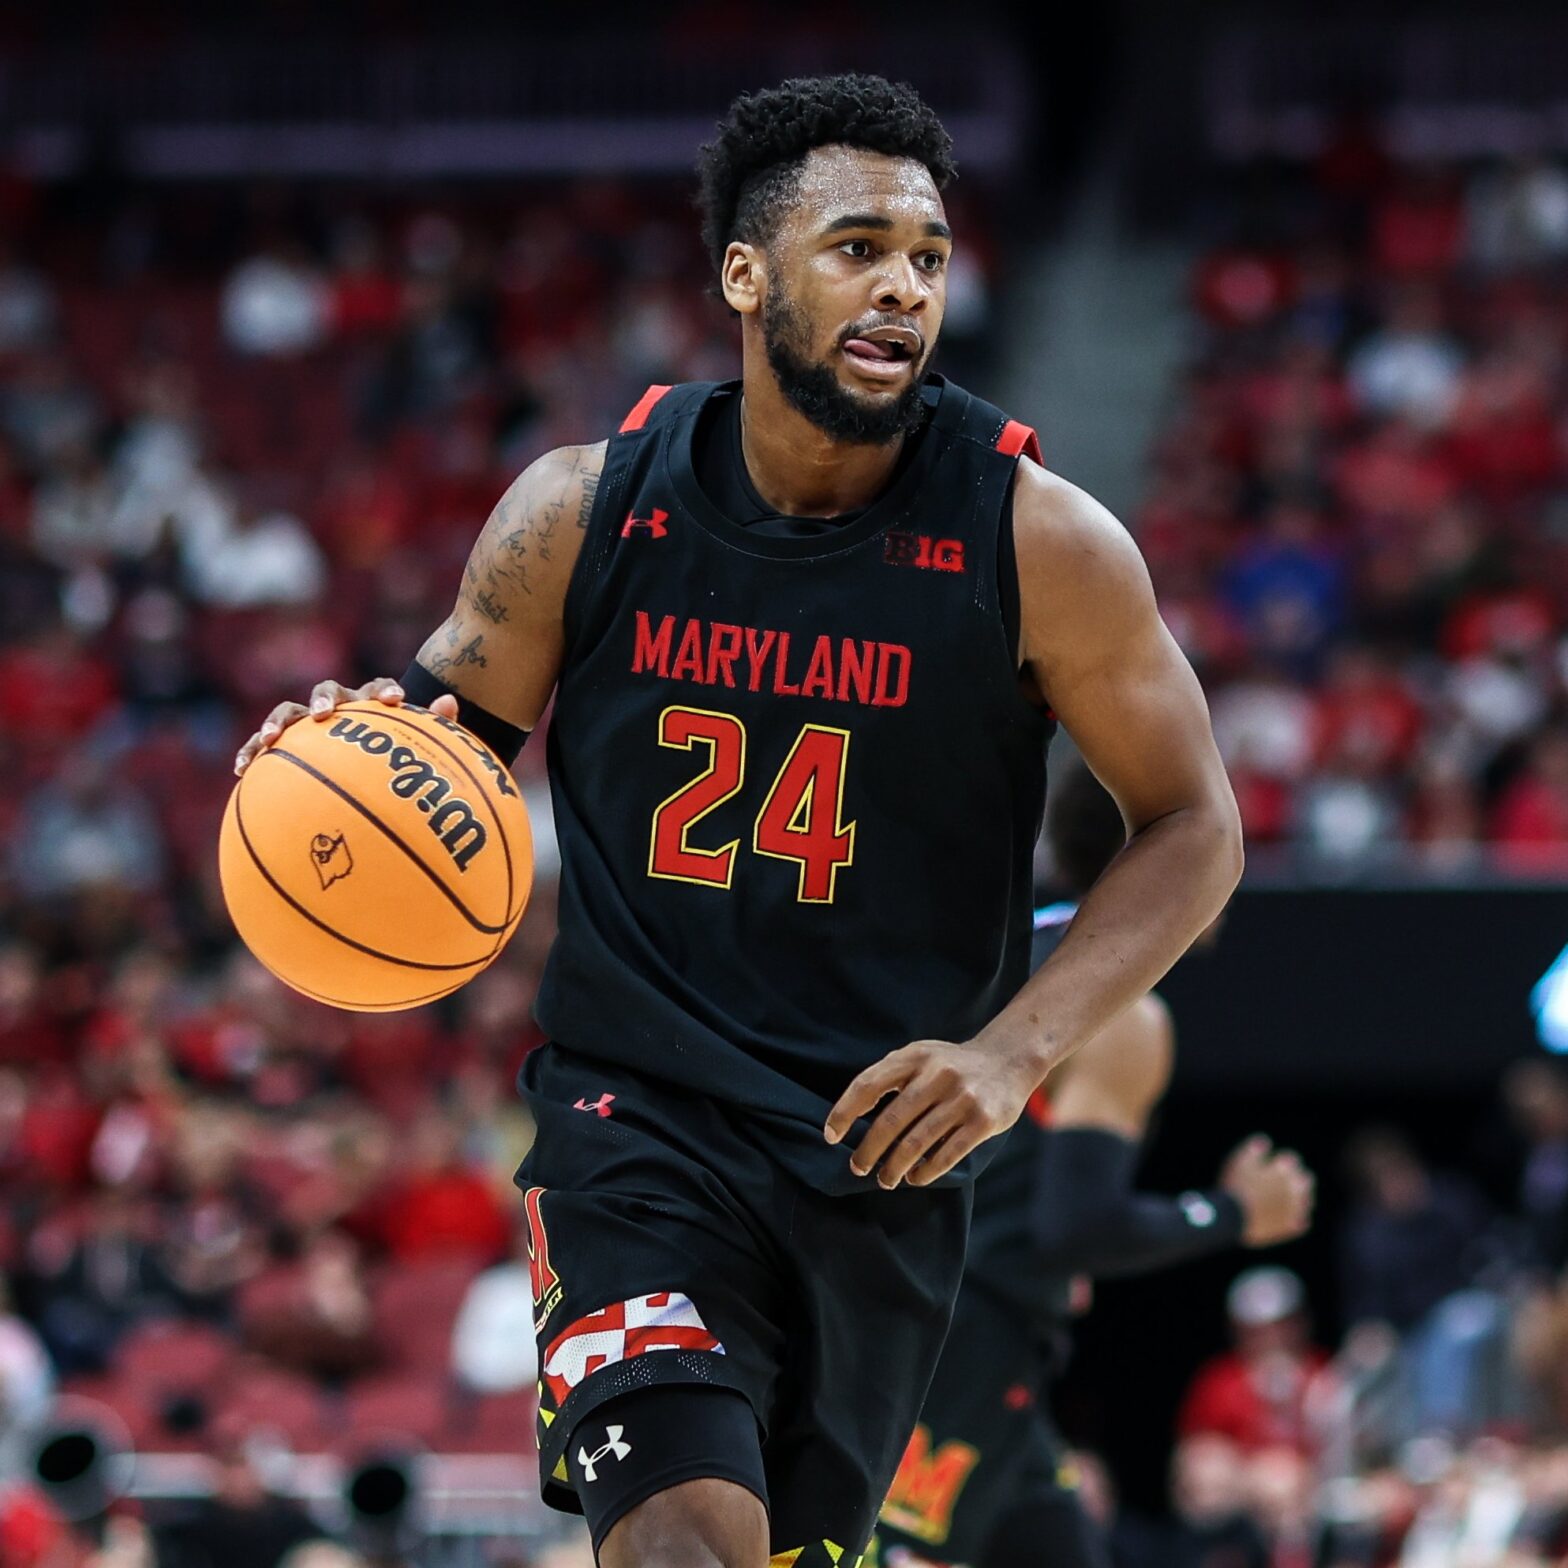 Maryland basketball earned their seventh straight win over Louisville behind 18 points from Donta Scott